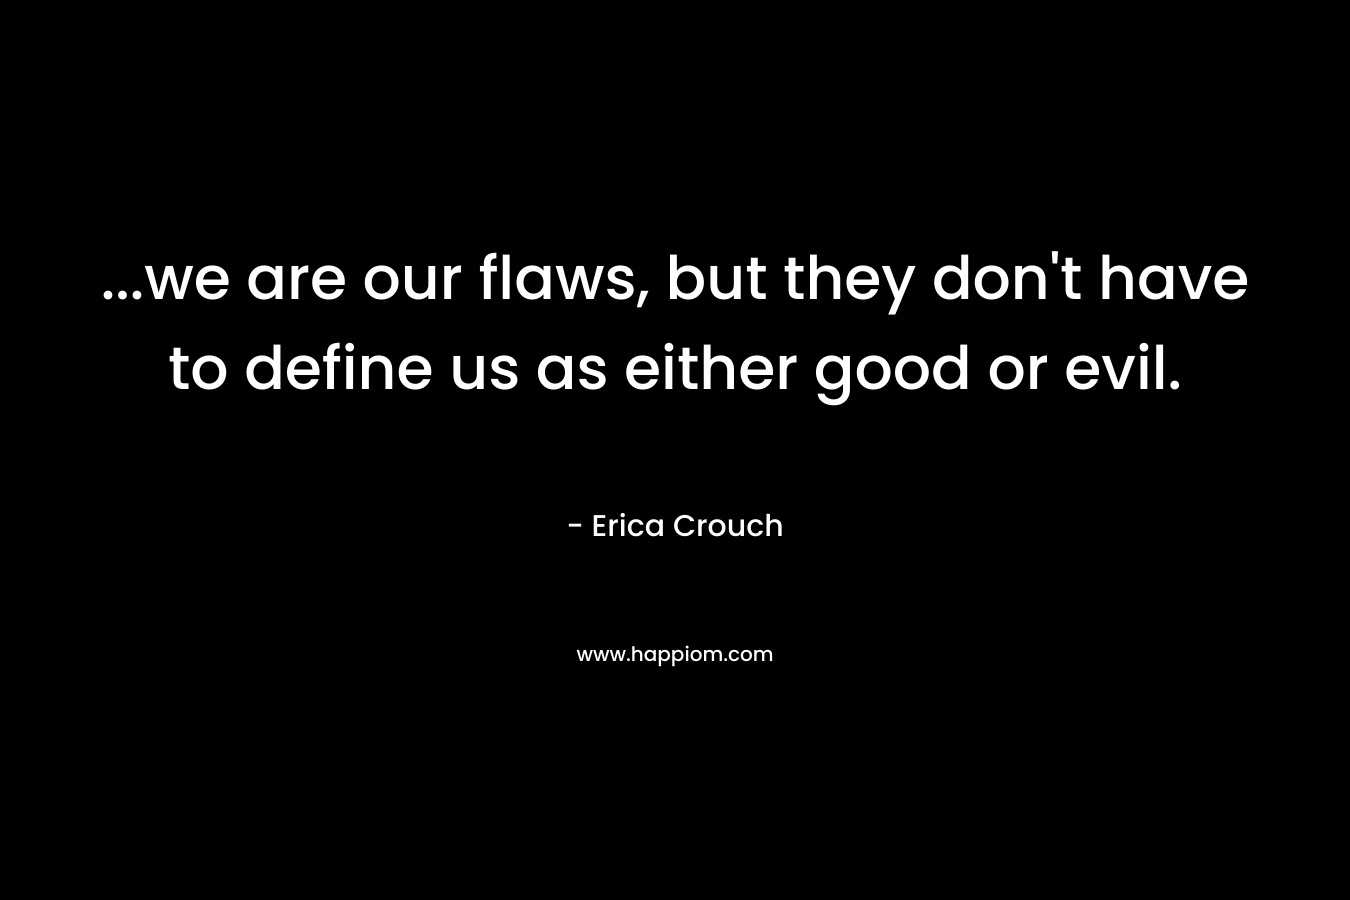 …we are our flaws, but they don’t have to define us as either good or evil. – Erica Crouch